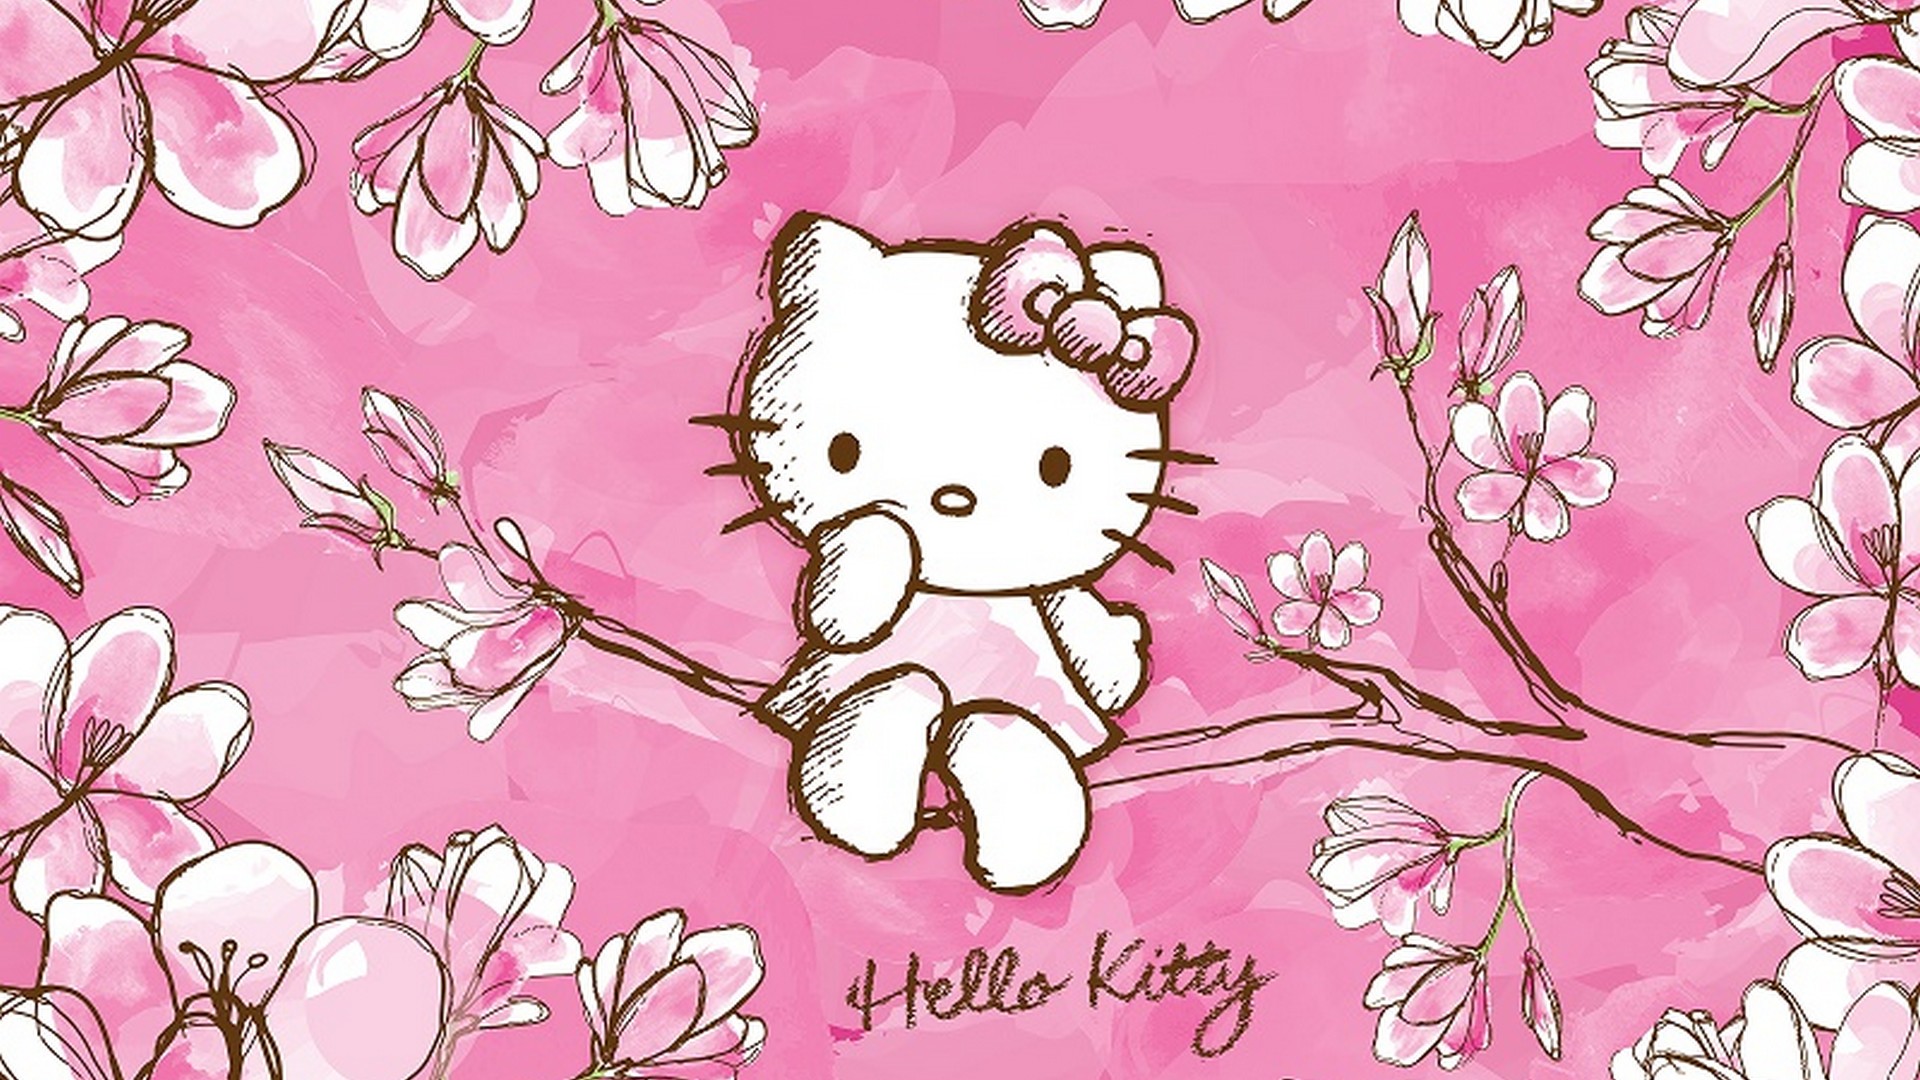 Wallpaper Hello Kitty Pictures with image resolution 1920x1080 pixel. You can use this wallpaper as background for your desktop Computer Screensavers, Android or iPhone smartphones